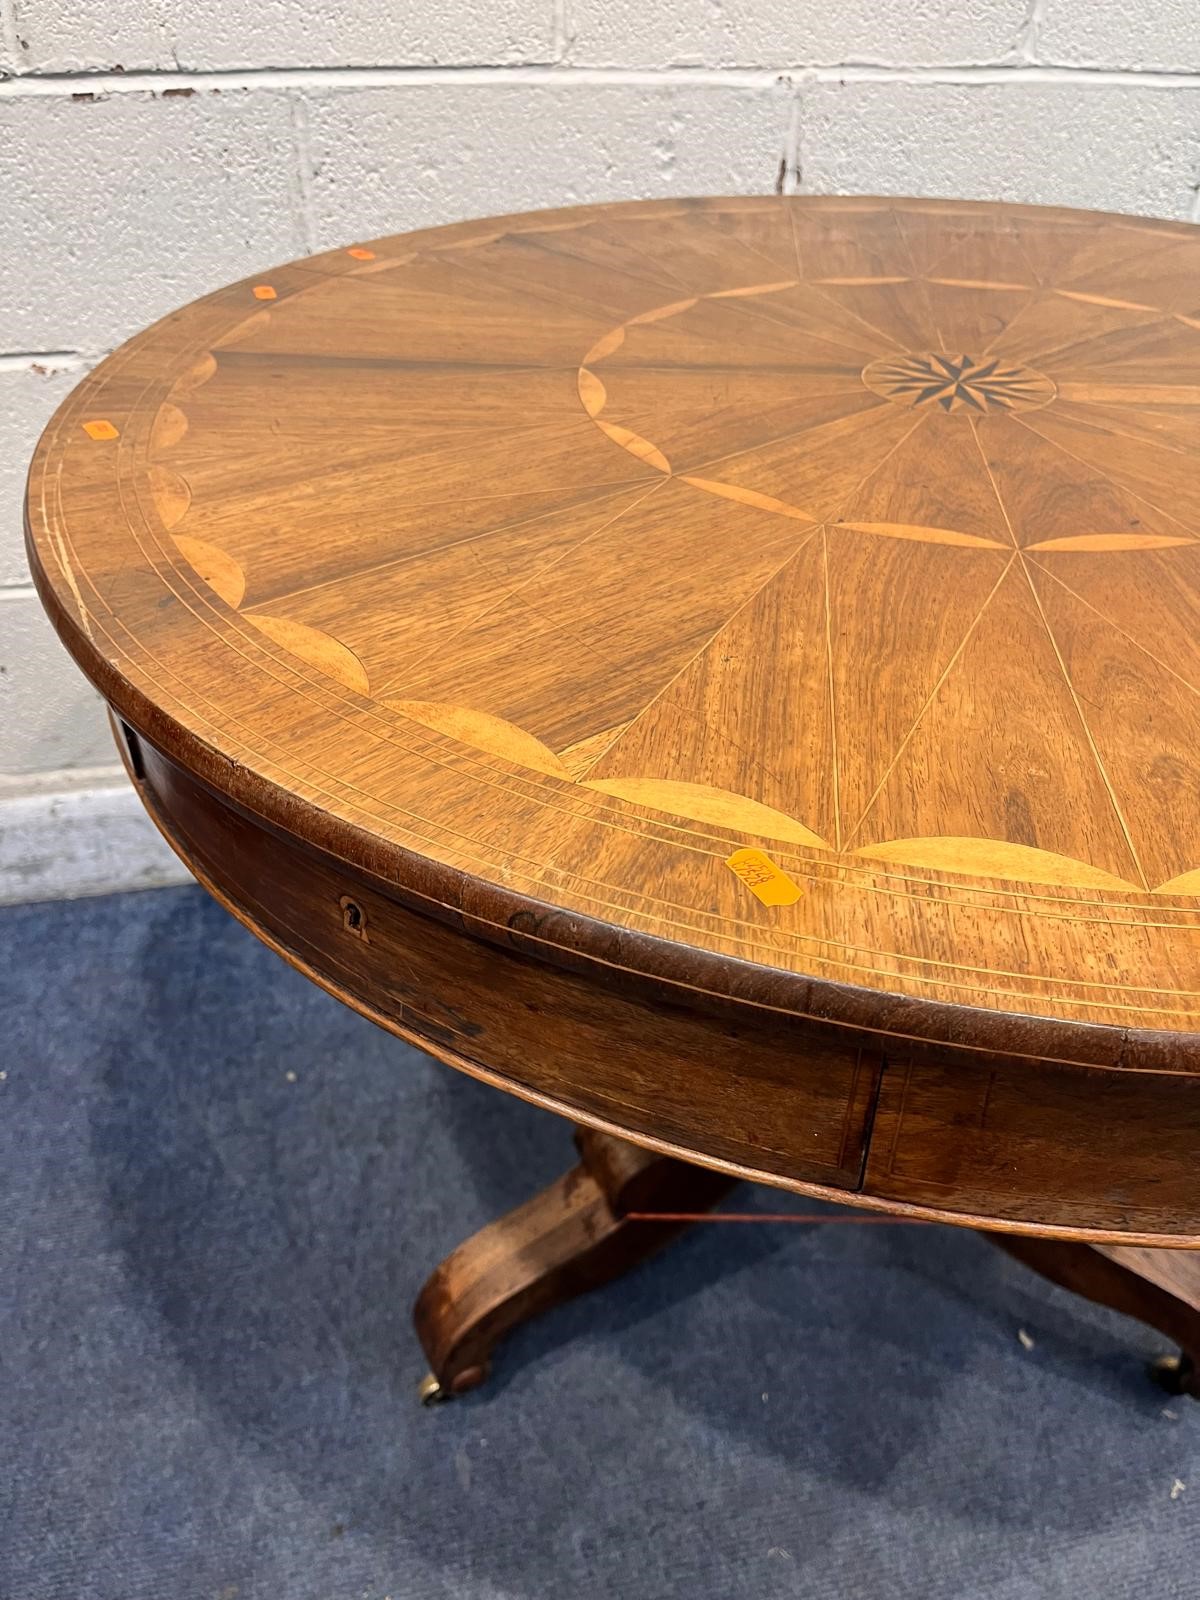 A 19TH CENTURY ROSEWOOD AND PARQUETRY INLAID CIRCULAR REVOLVING DRUM TABLE, central starburst, - Image 4 of 5